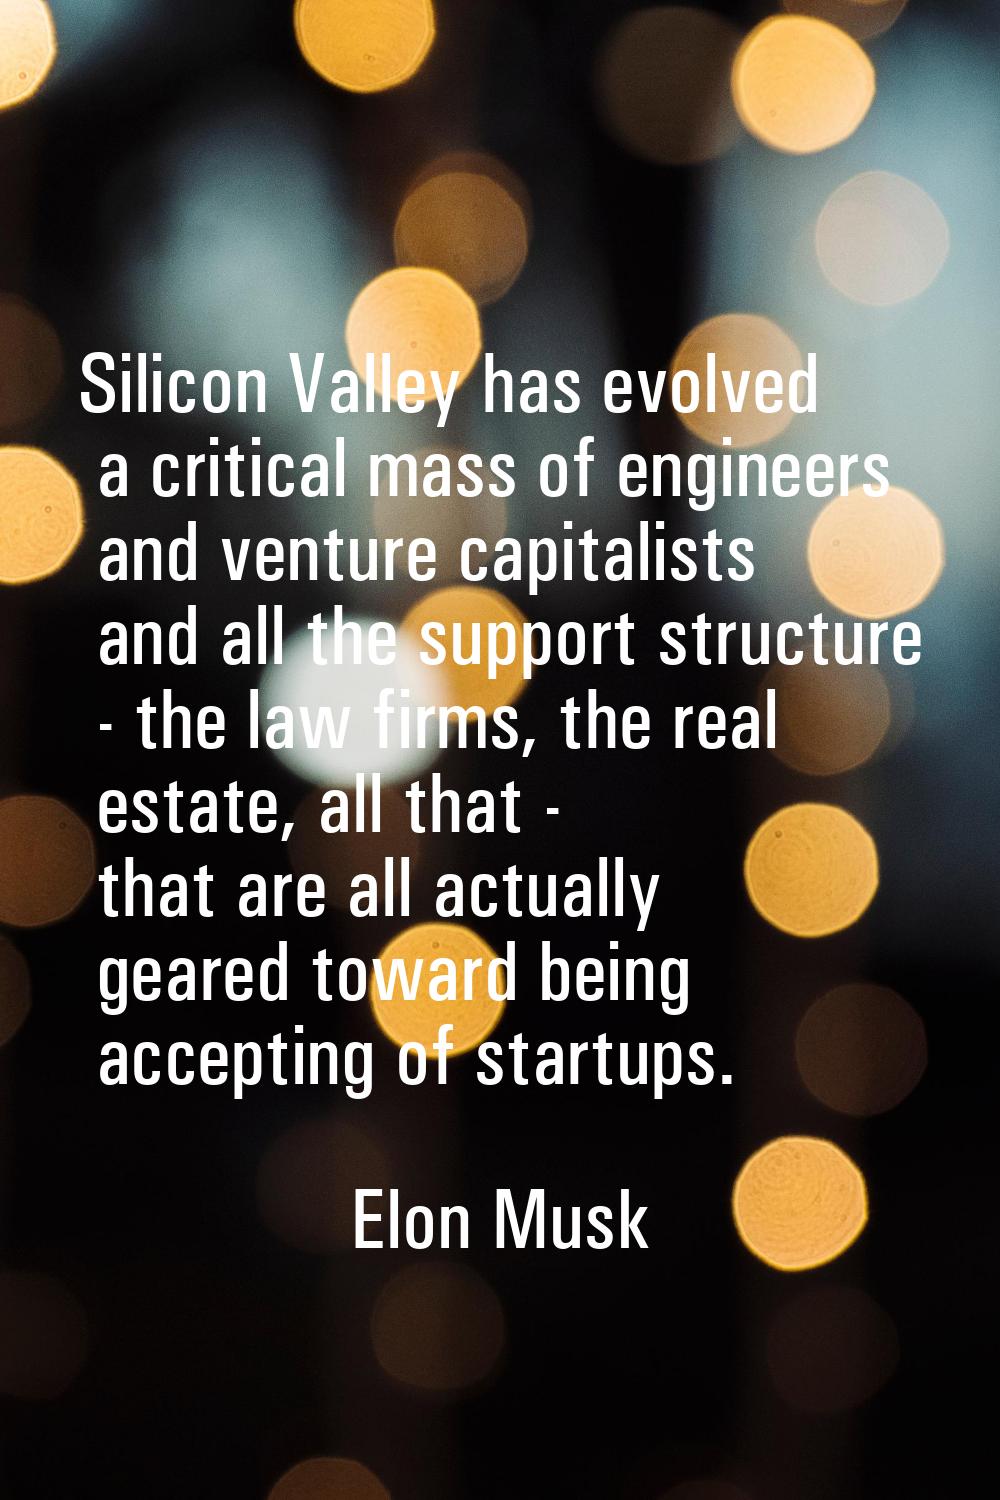 Silicon Valley has evolved a critical mass of engineers and venture capitalists and all the support